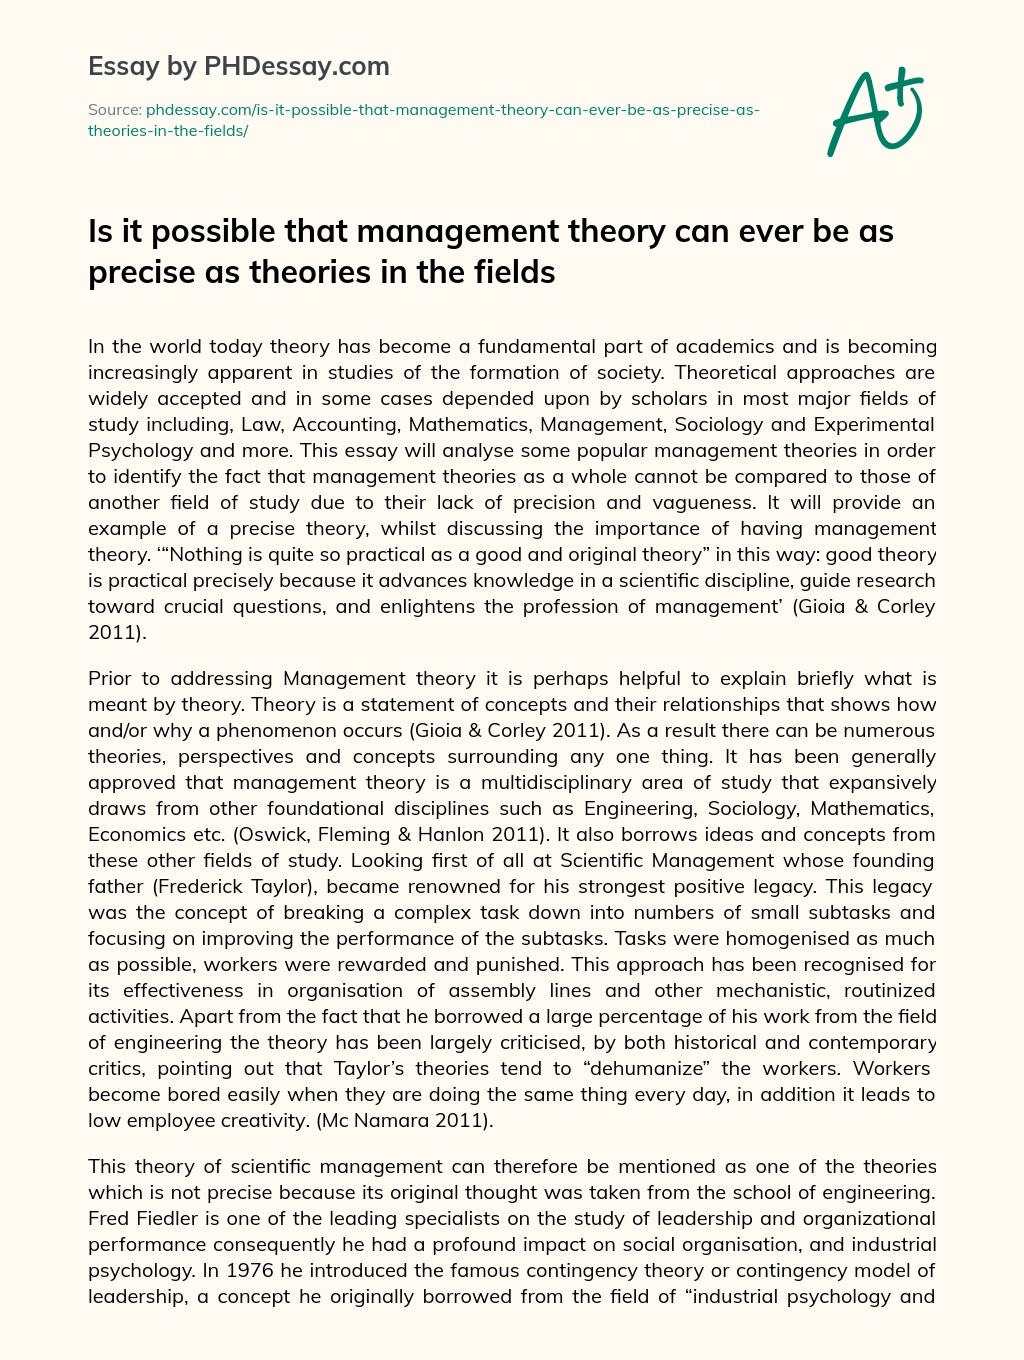 The Importance of Management Theory in Academia and its Lack of Precision essay